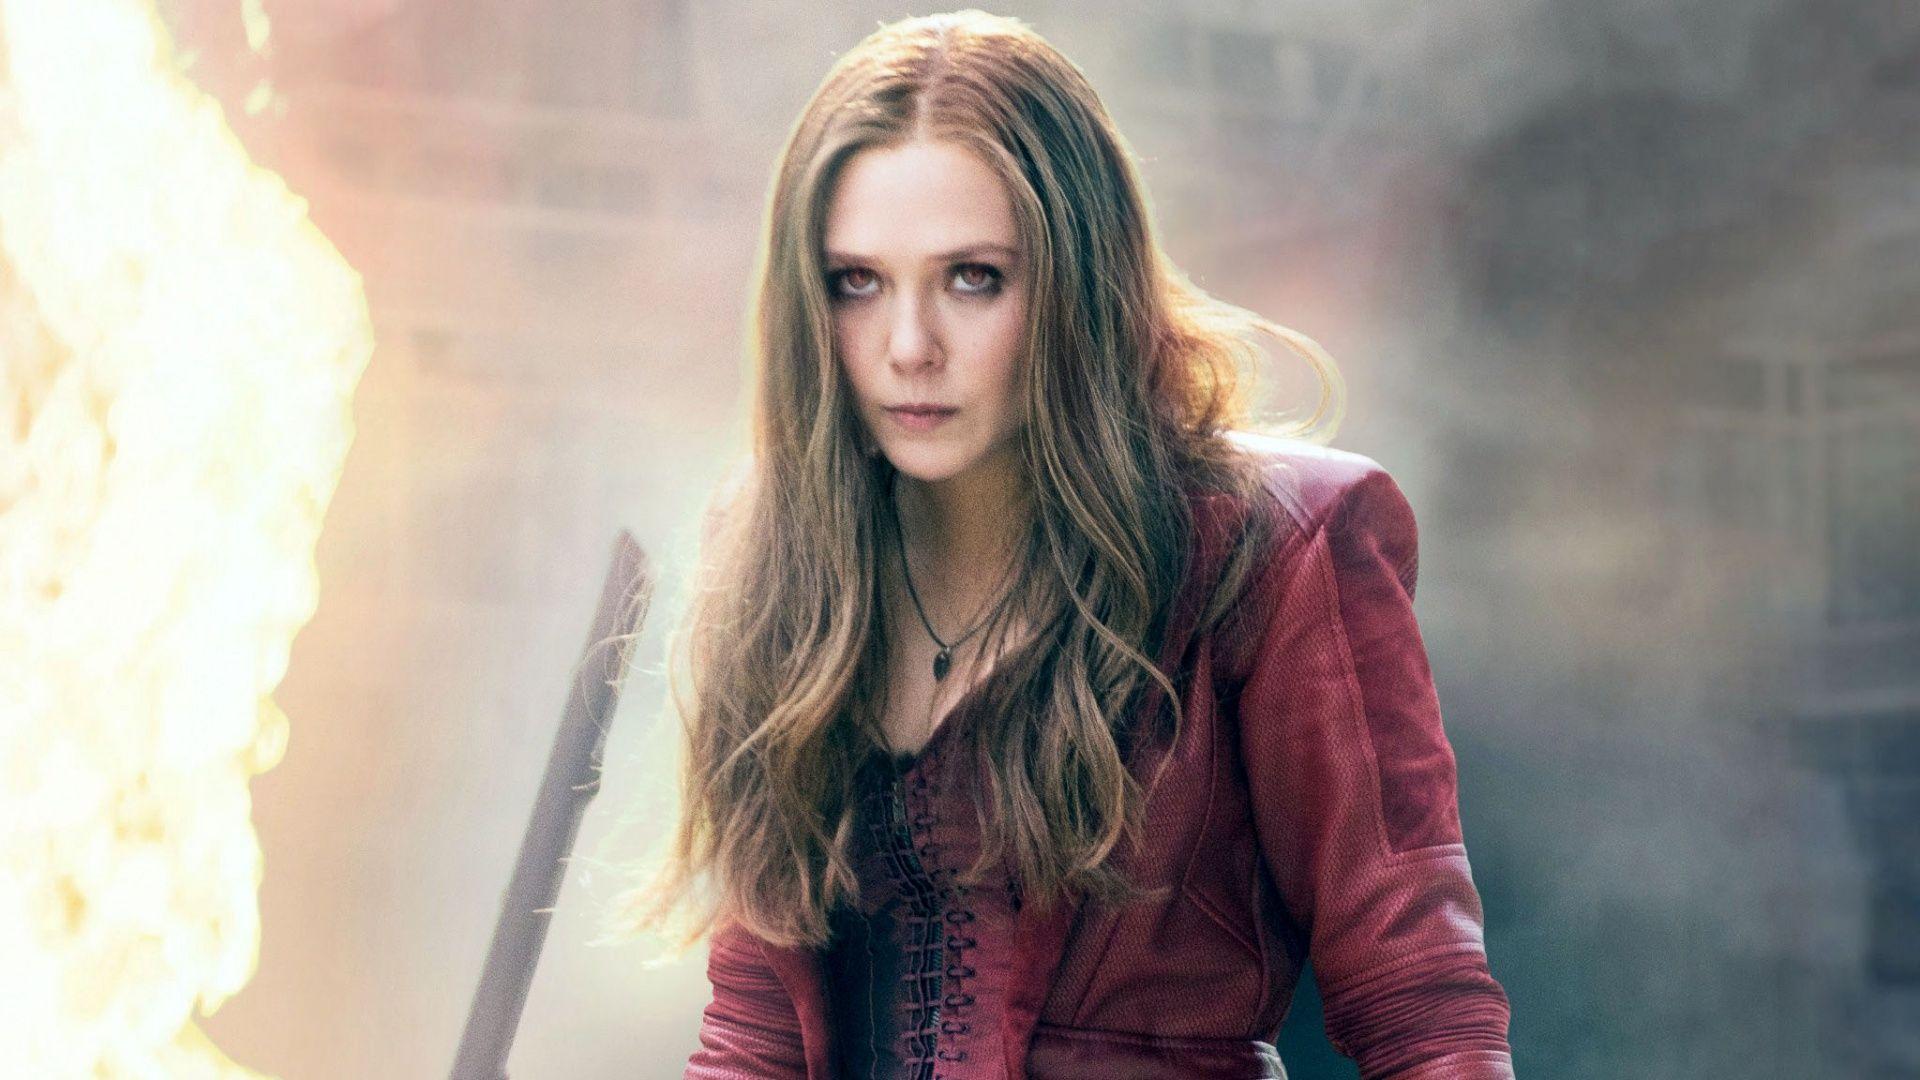 Wanda Will Finally Appear as the Scarlet Witch in 'WandaVision'